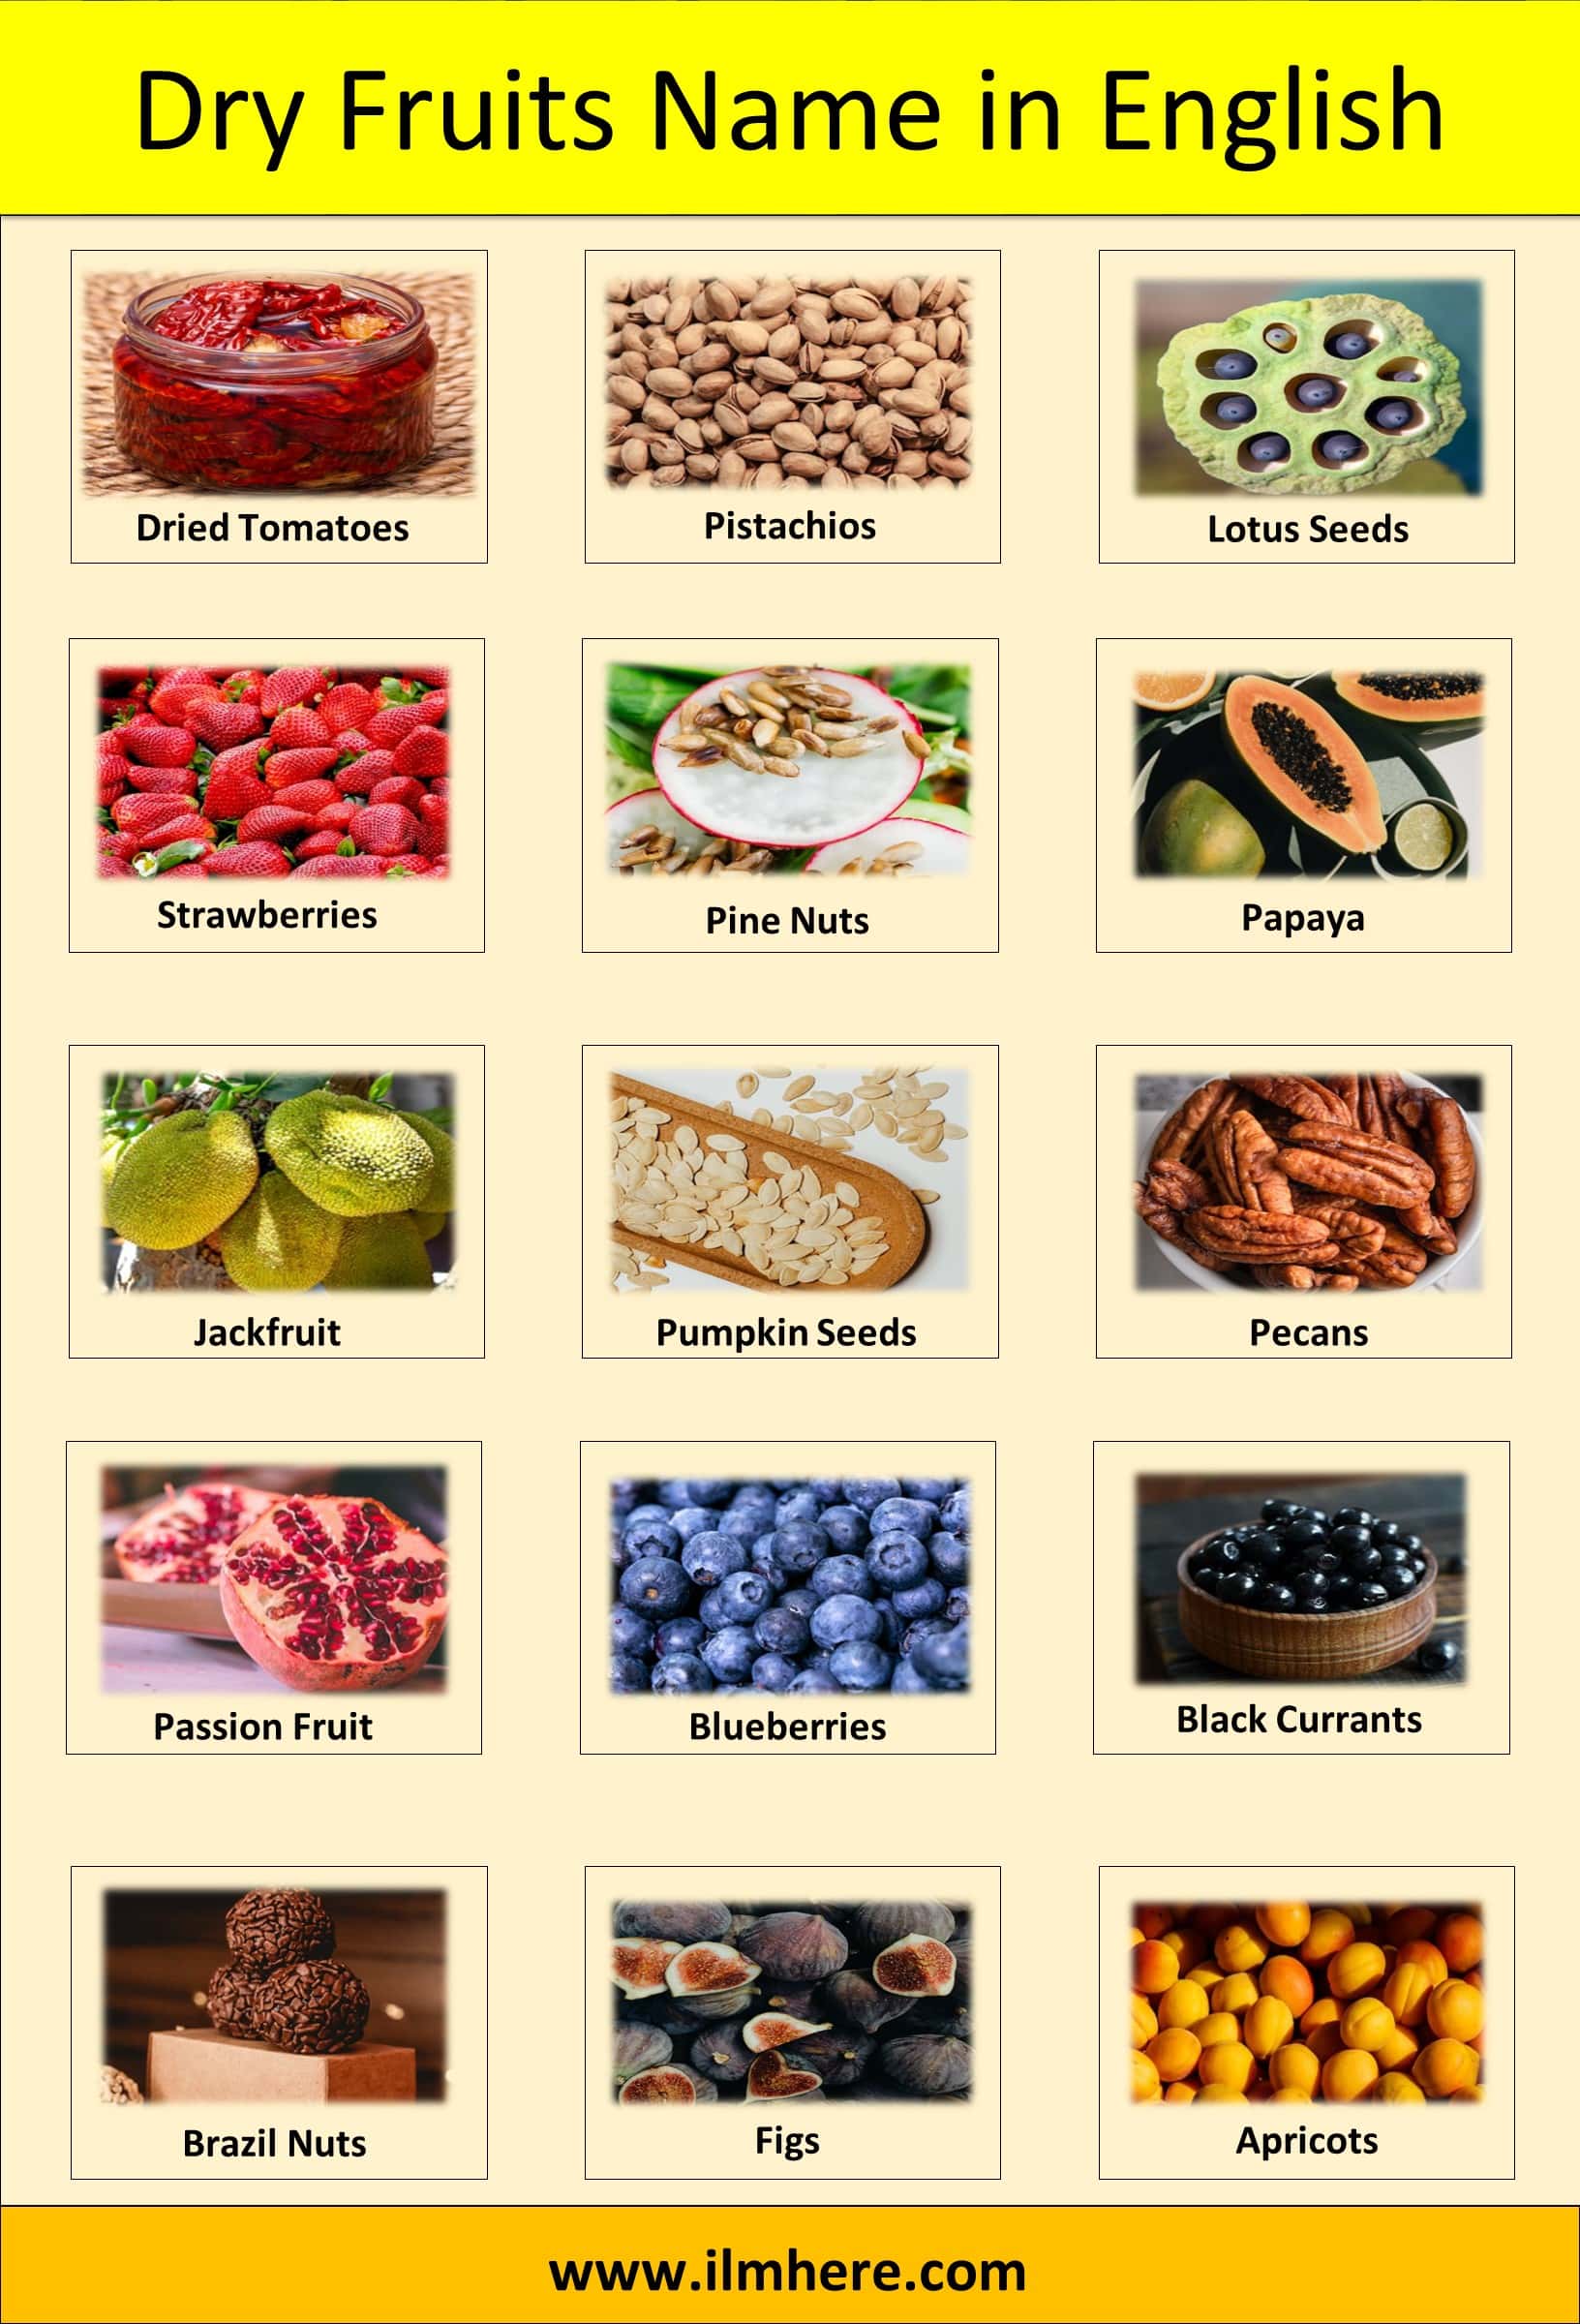 Dry Fruits Name in English, Urdu and Hindi with Images,Usage and Benifits